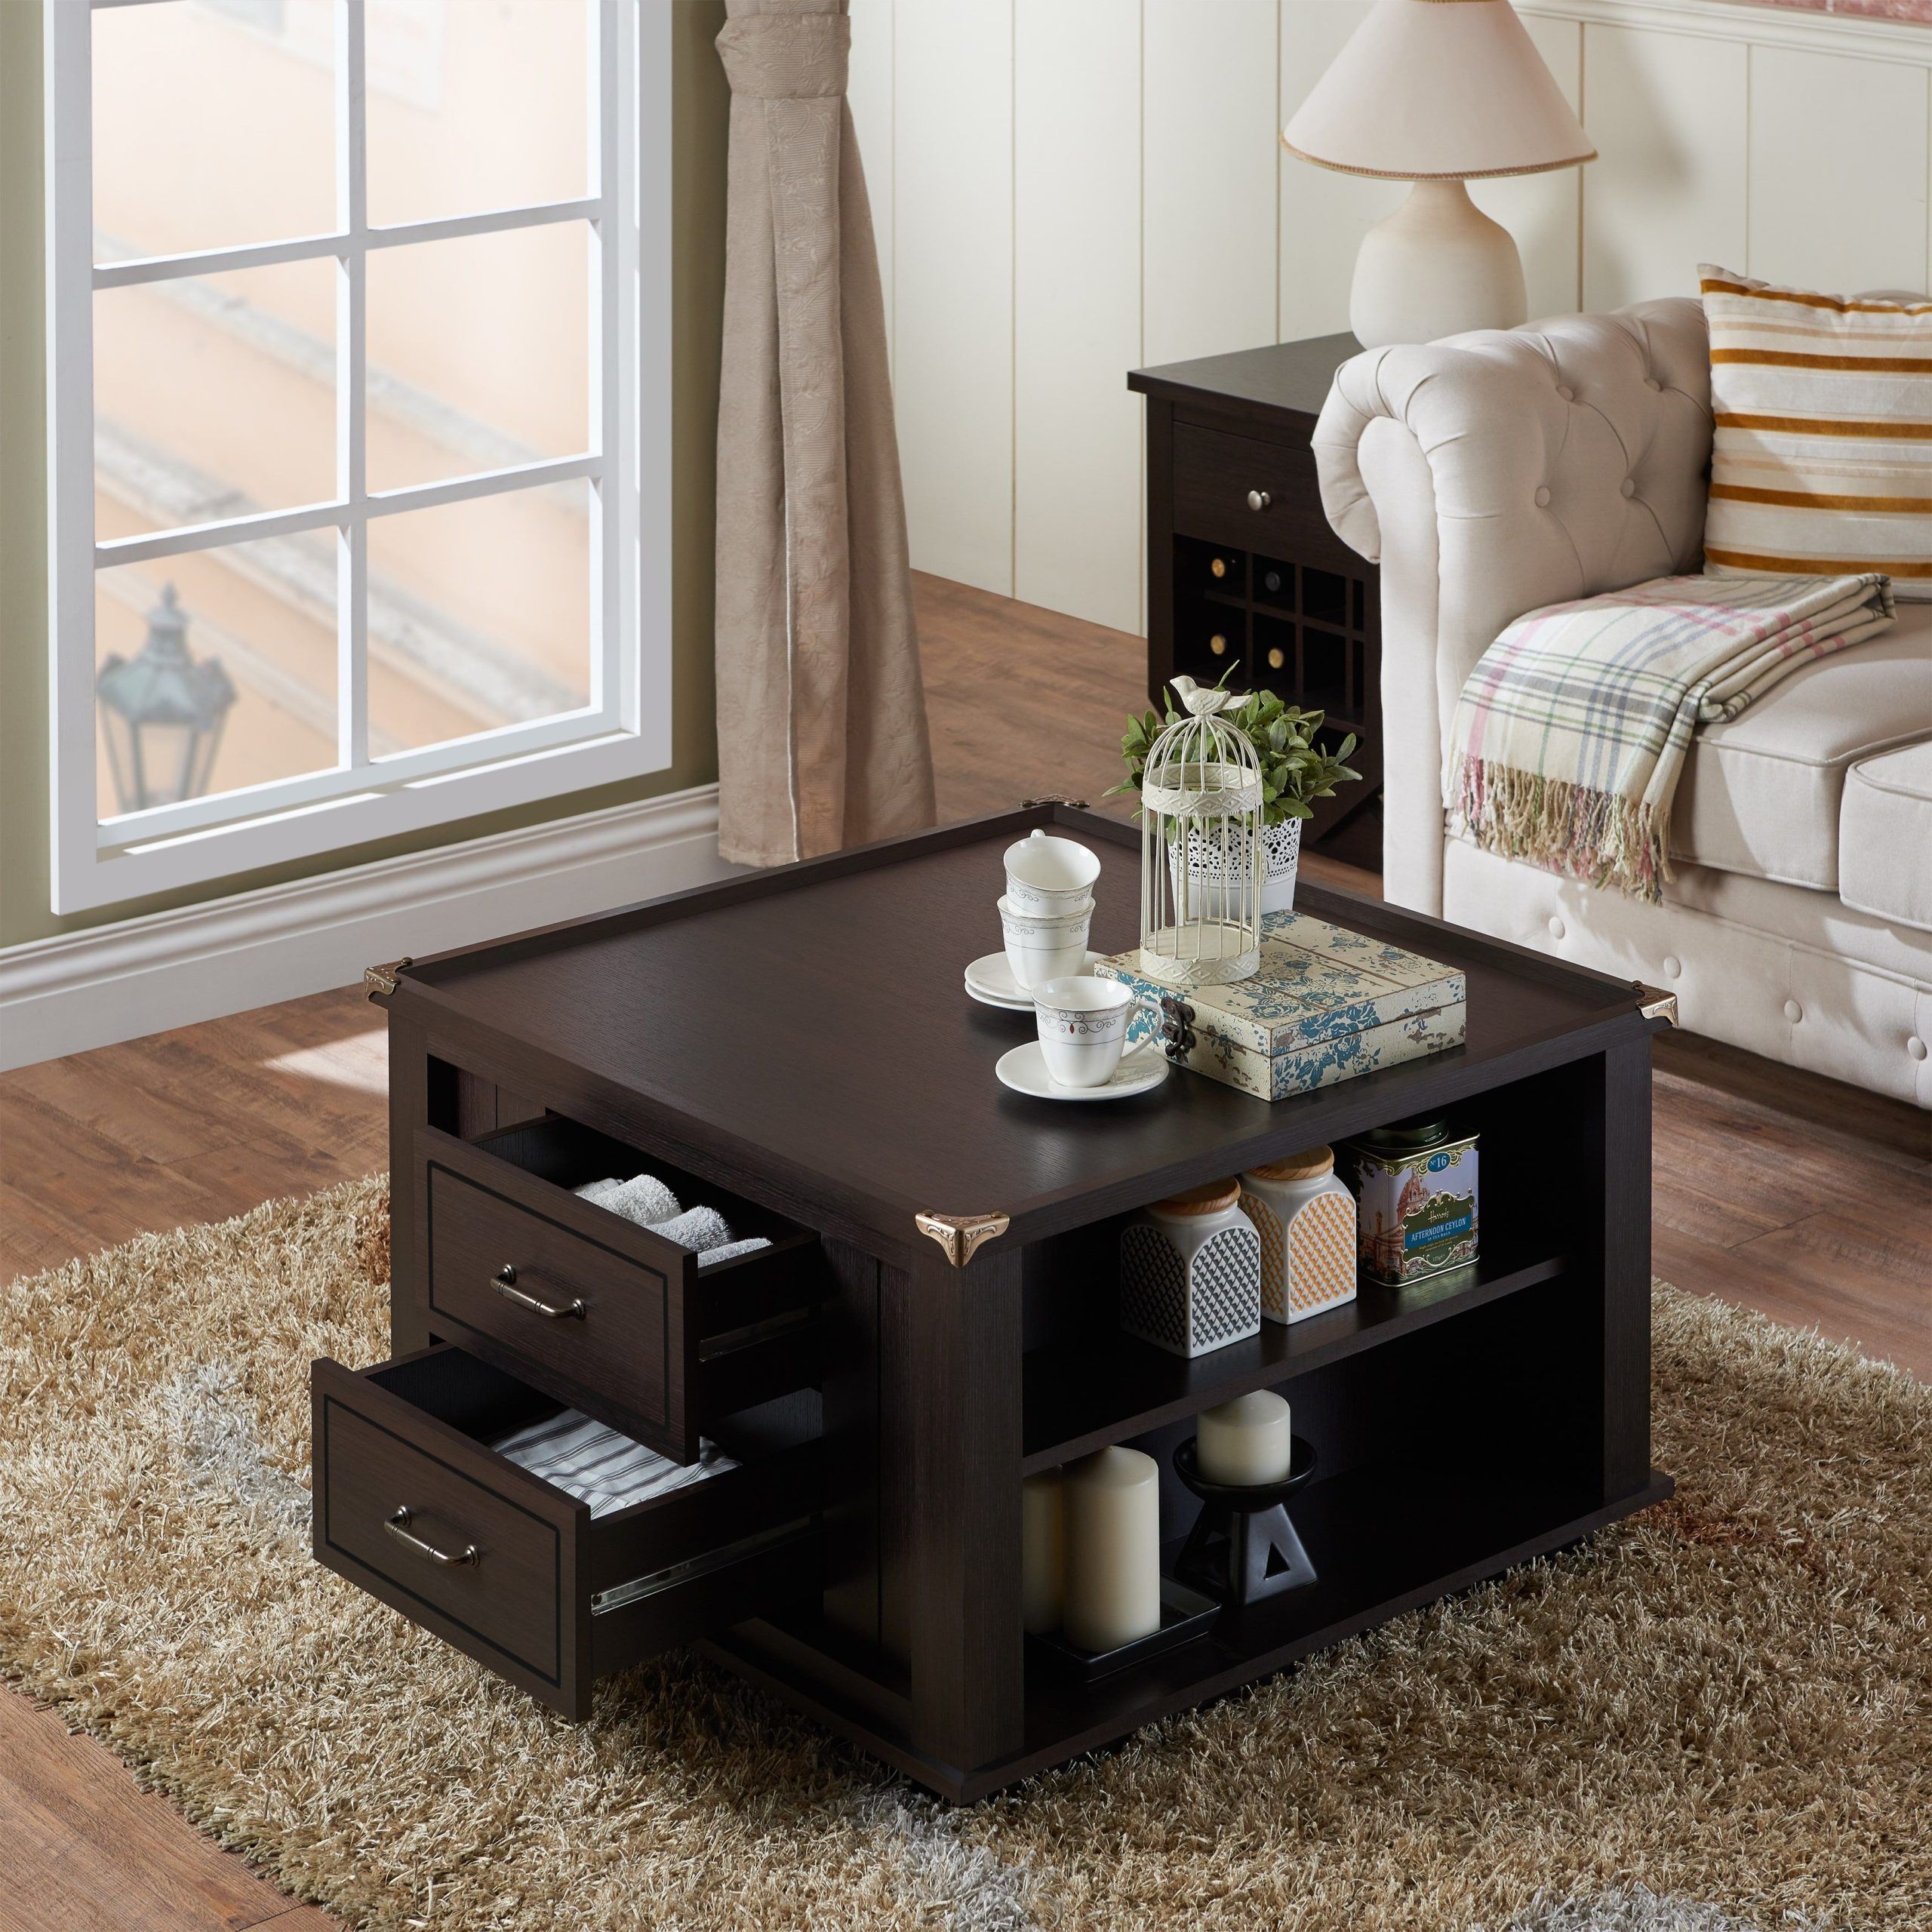 Our Best Living Room Furniture Deals | Coffee Table, Furniture Of For Transitional Square Coffee Tables (Gallery 3 of 20)